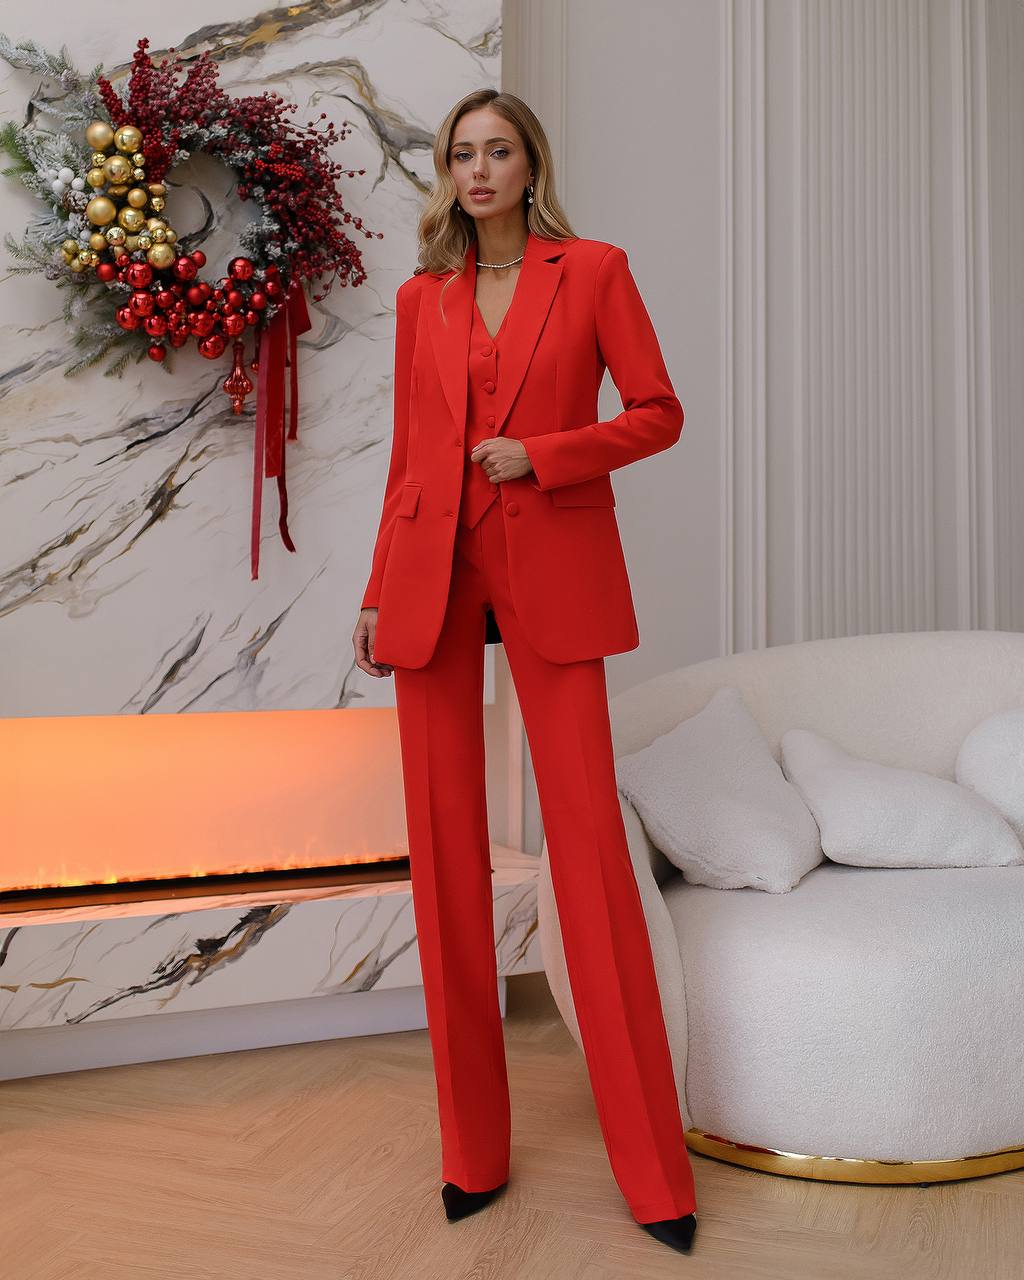 a woman in a red suit stands in front of a christmas wreath